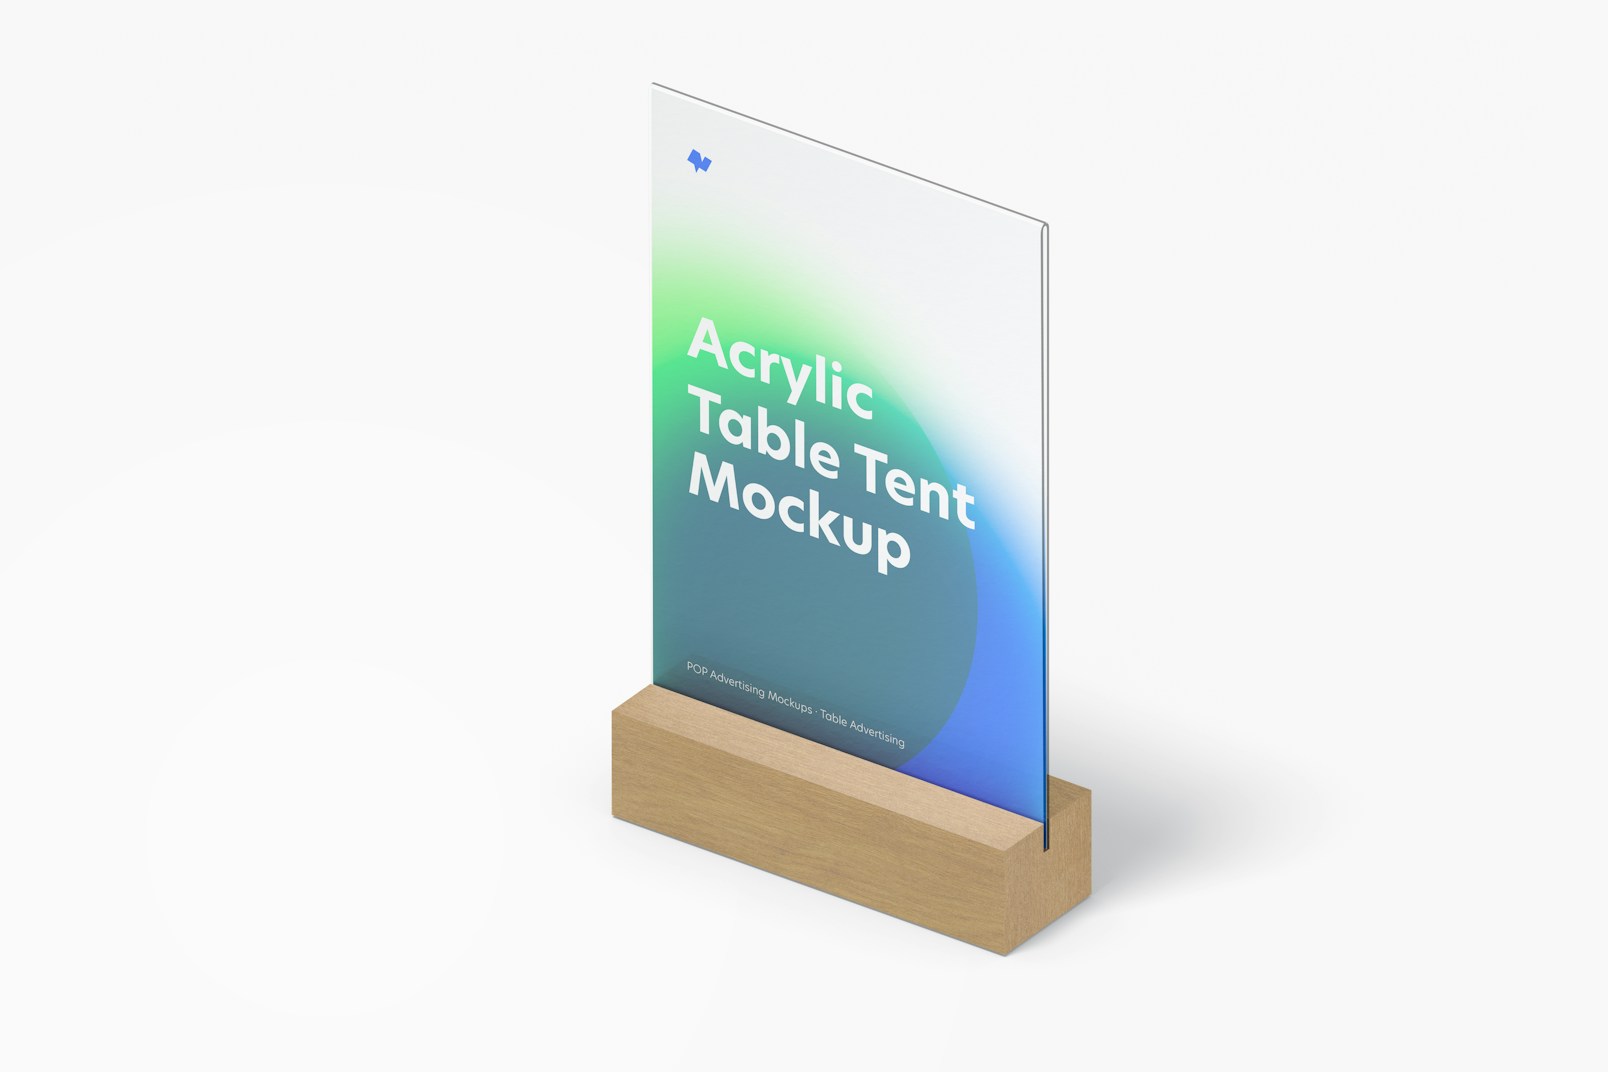 Acrylic Table Tent with Wood Base Mockup, Isometric Left View